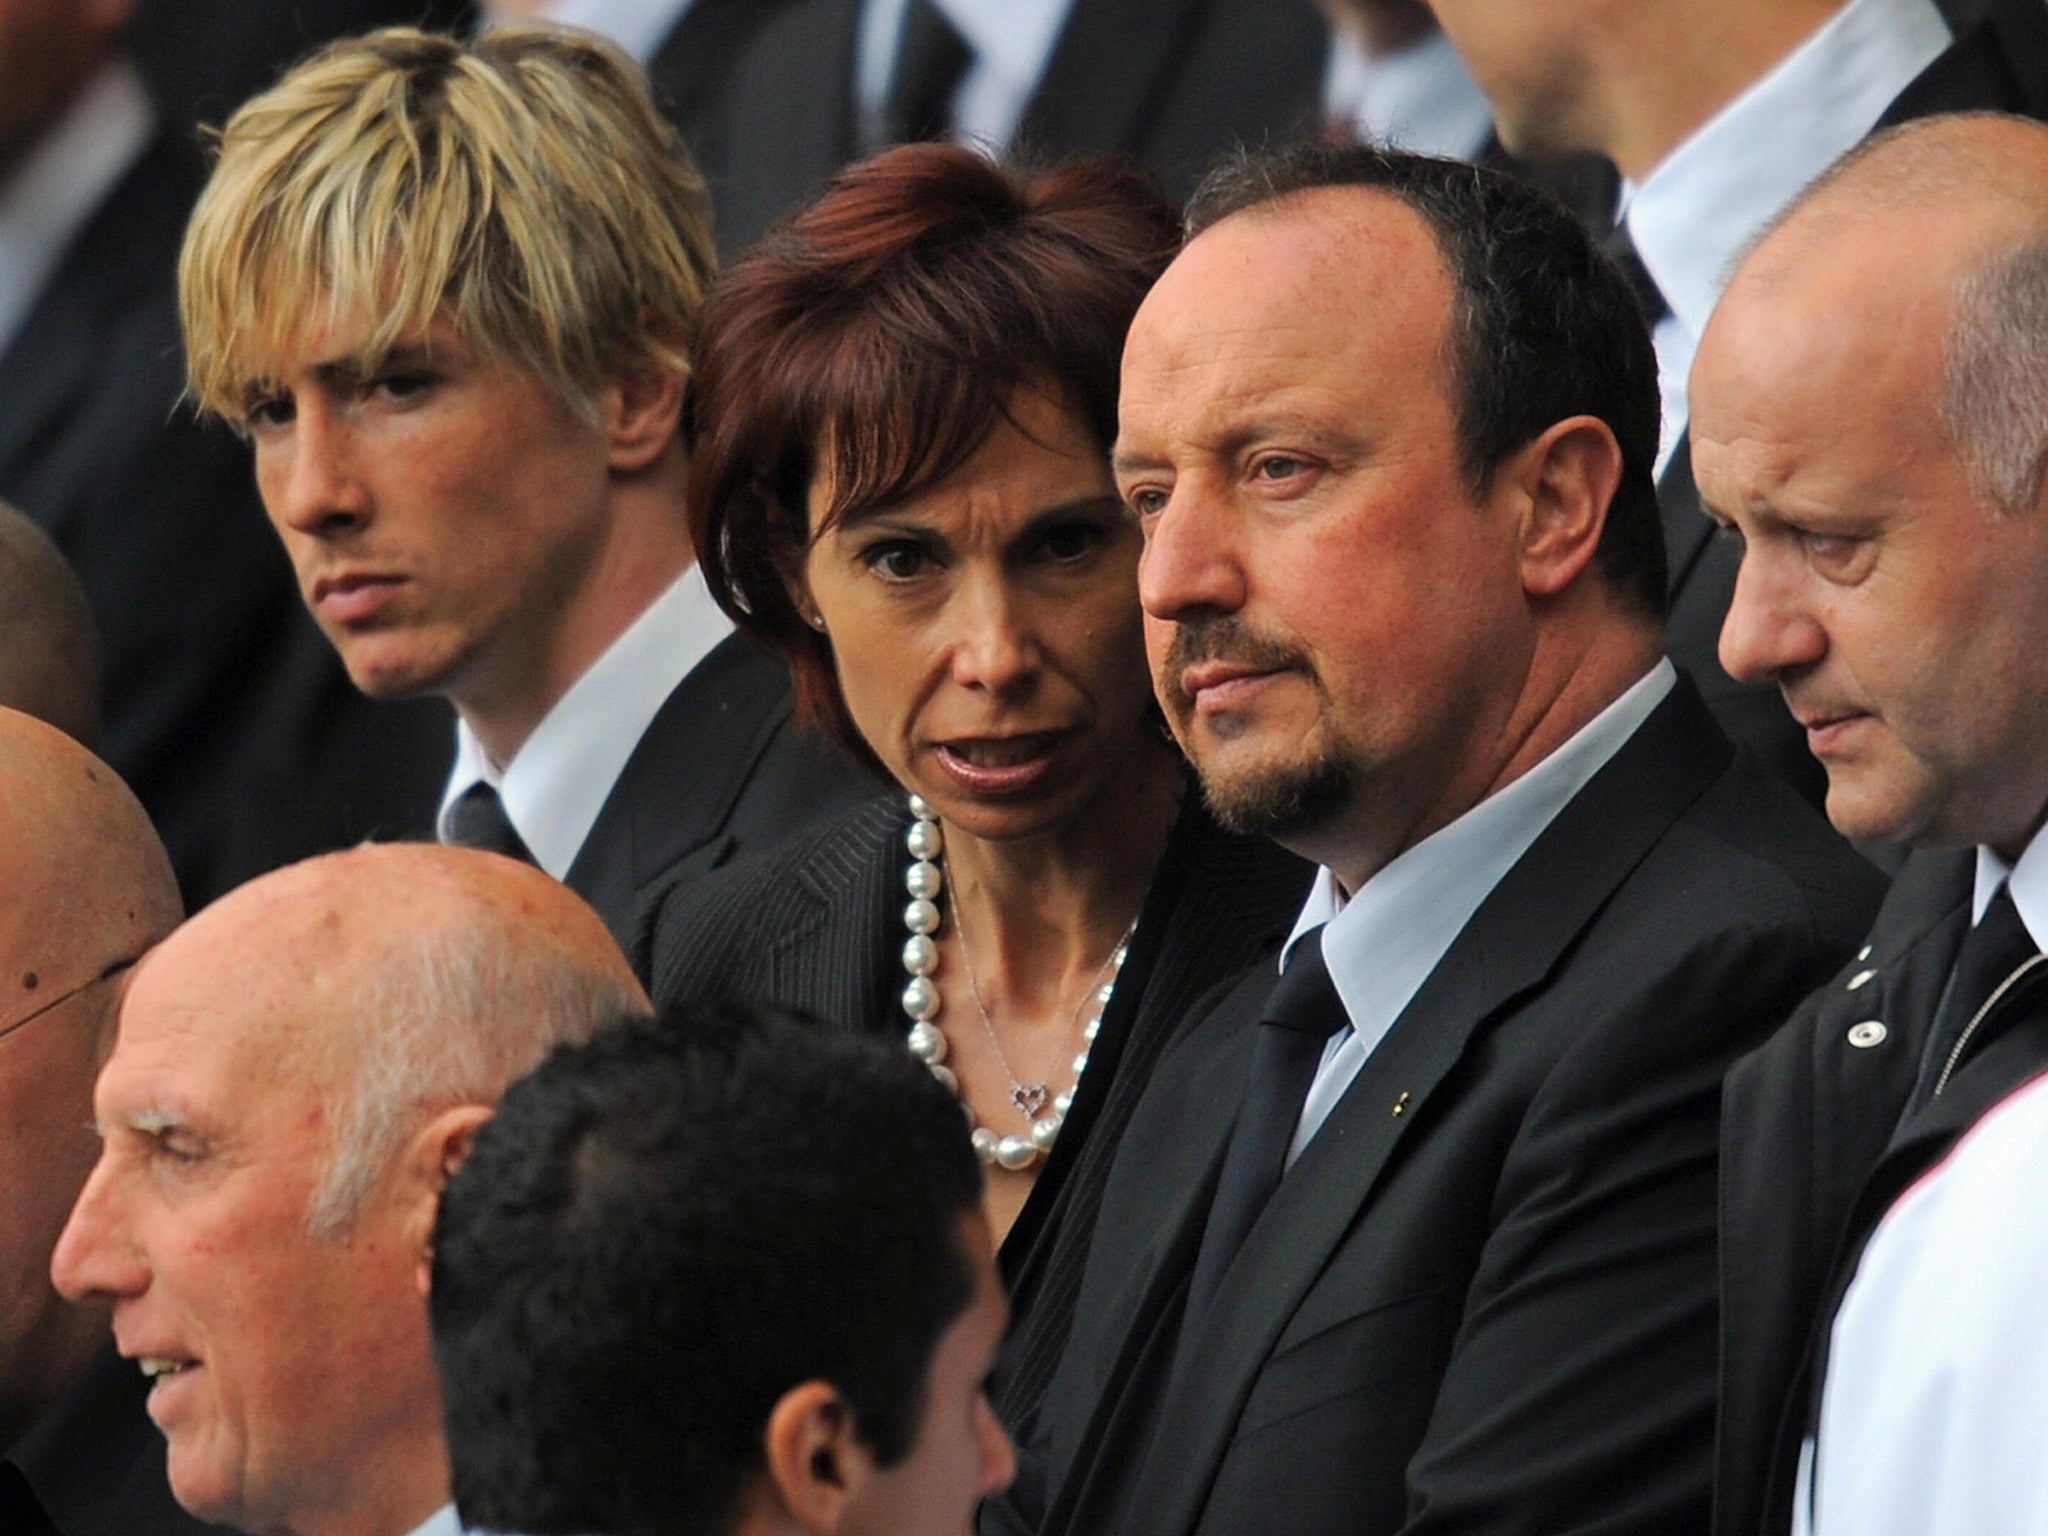 Rafa Benitez sent a message of praise to the families of the Hillsborough disaster victims